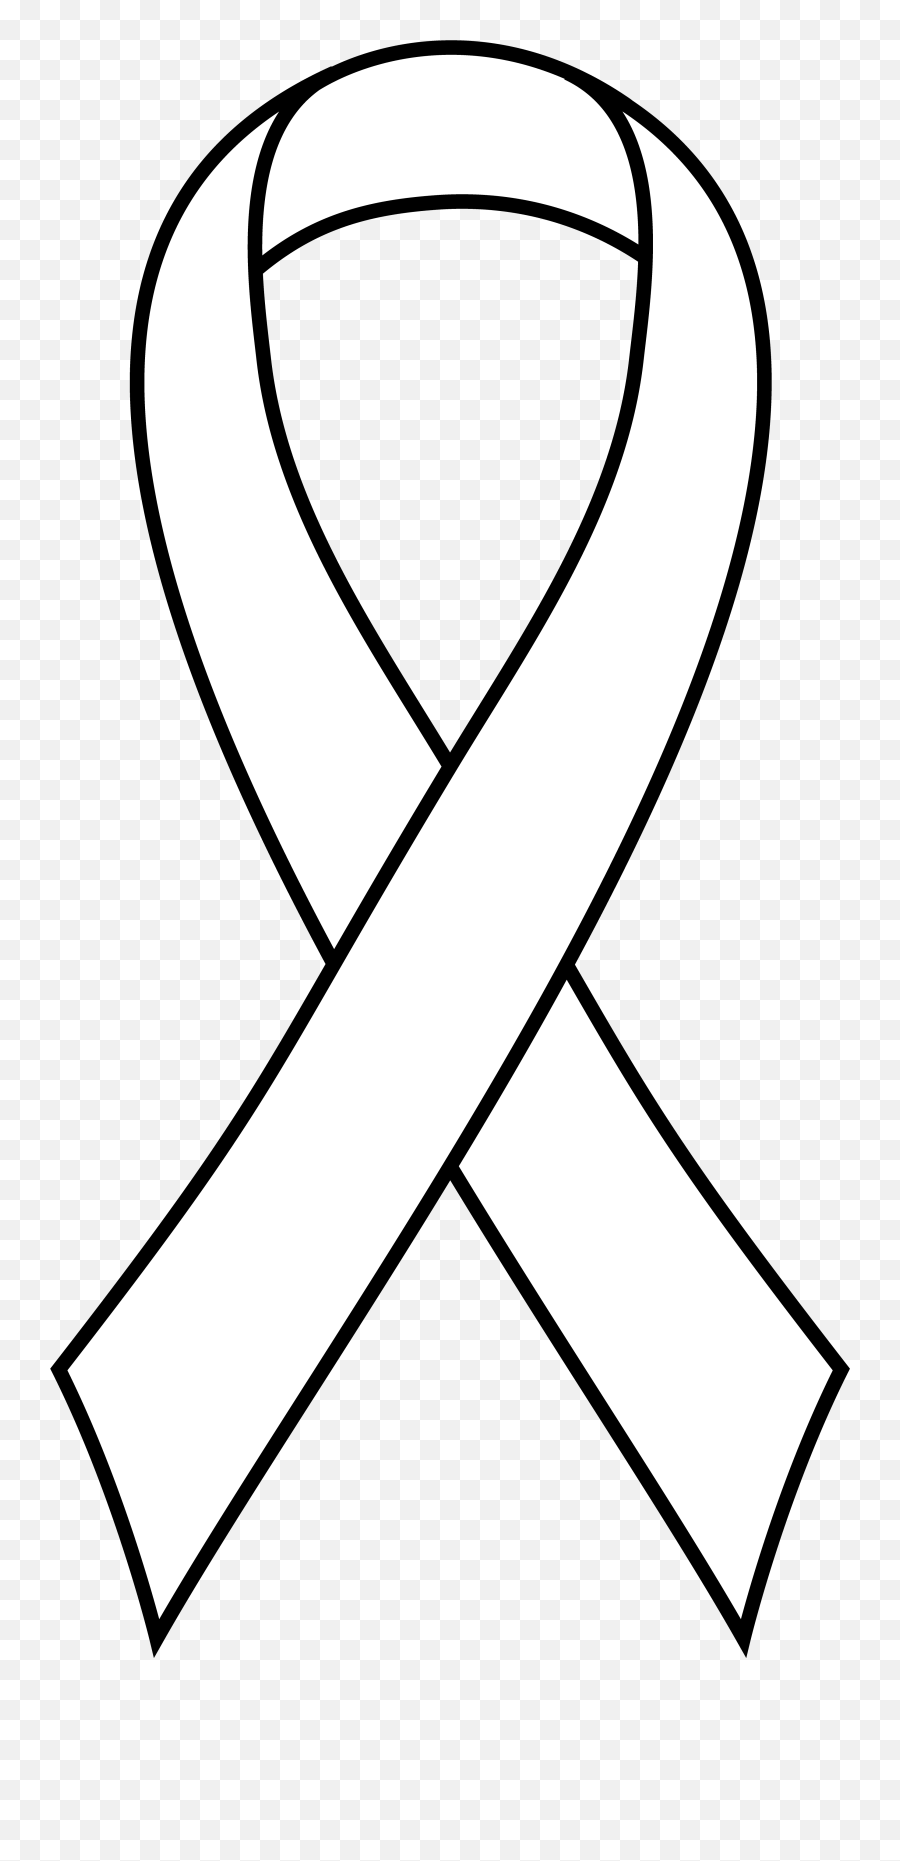 Support Drawing Colon Cancer Ribbon - Lung Cancer Ribbon Svg Emoji,Pink Breast Cancer Ribbon Emoji